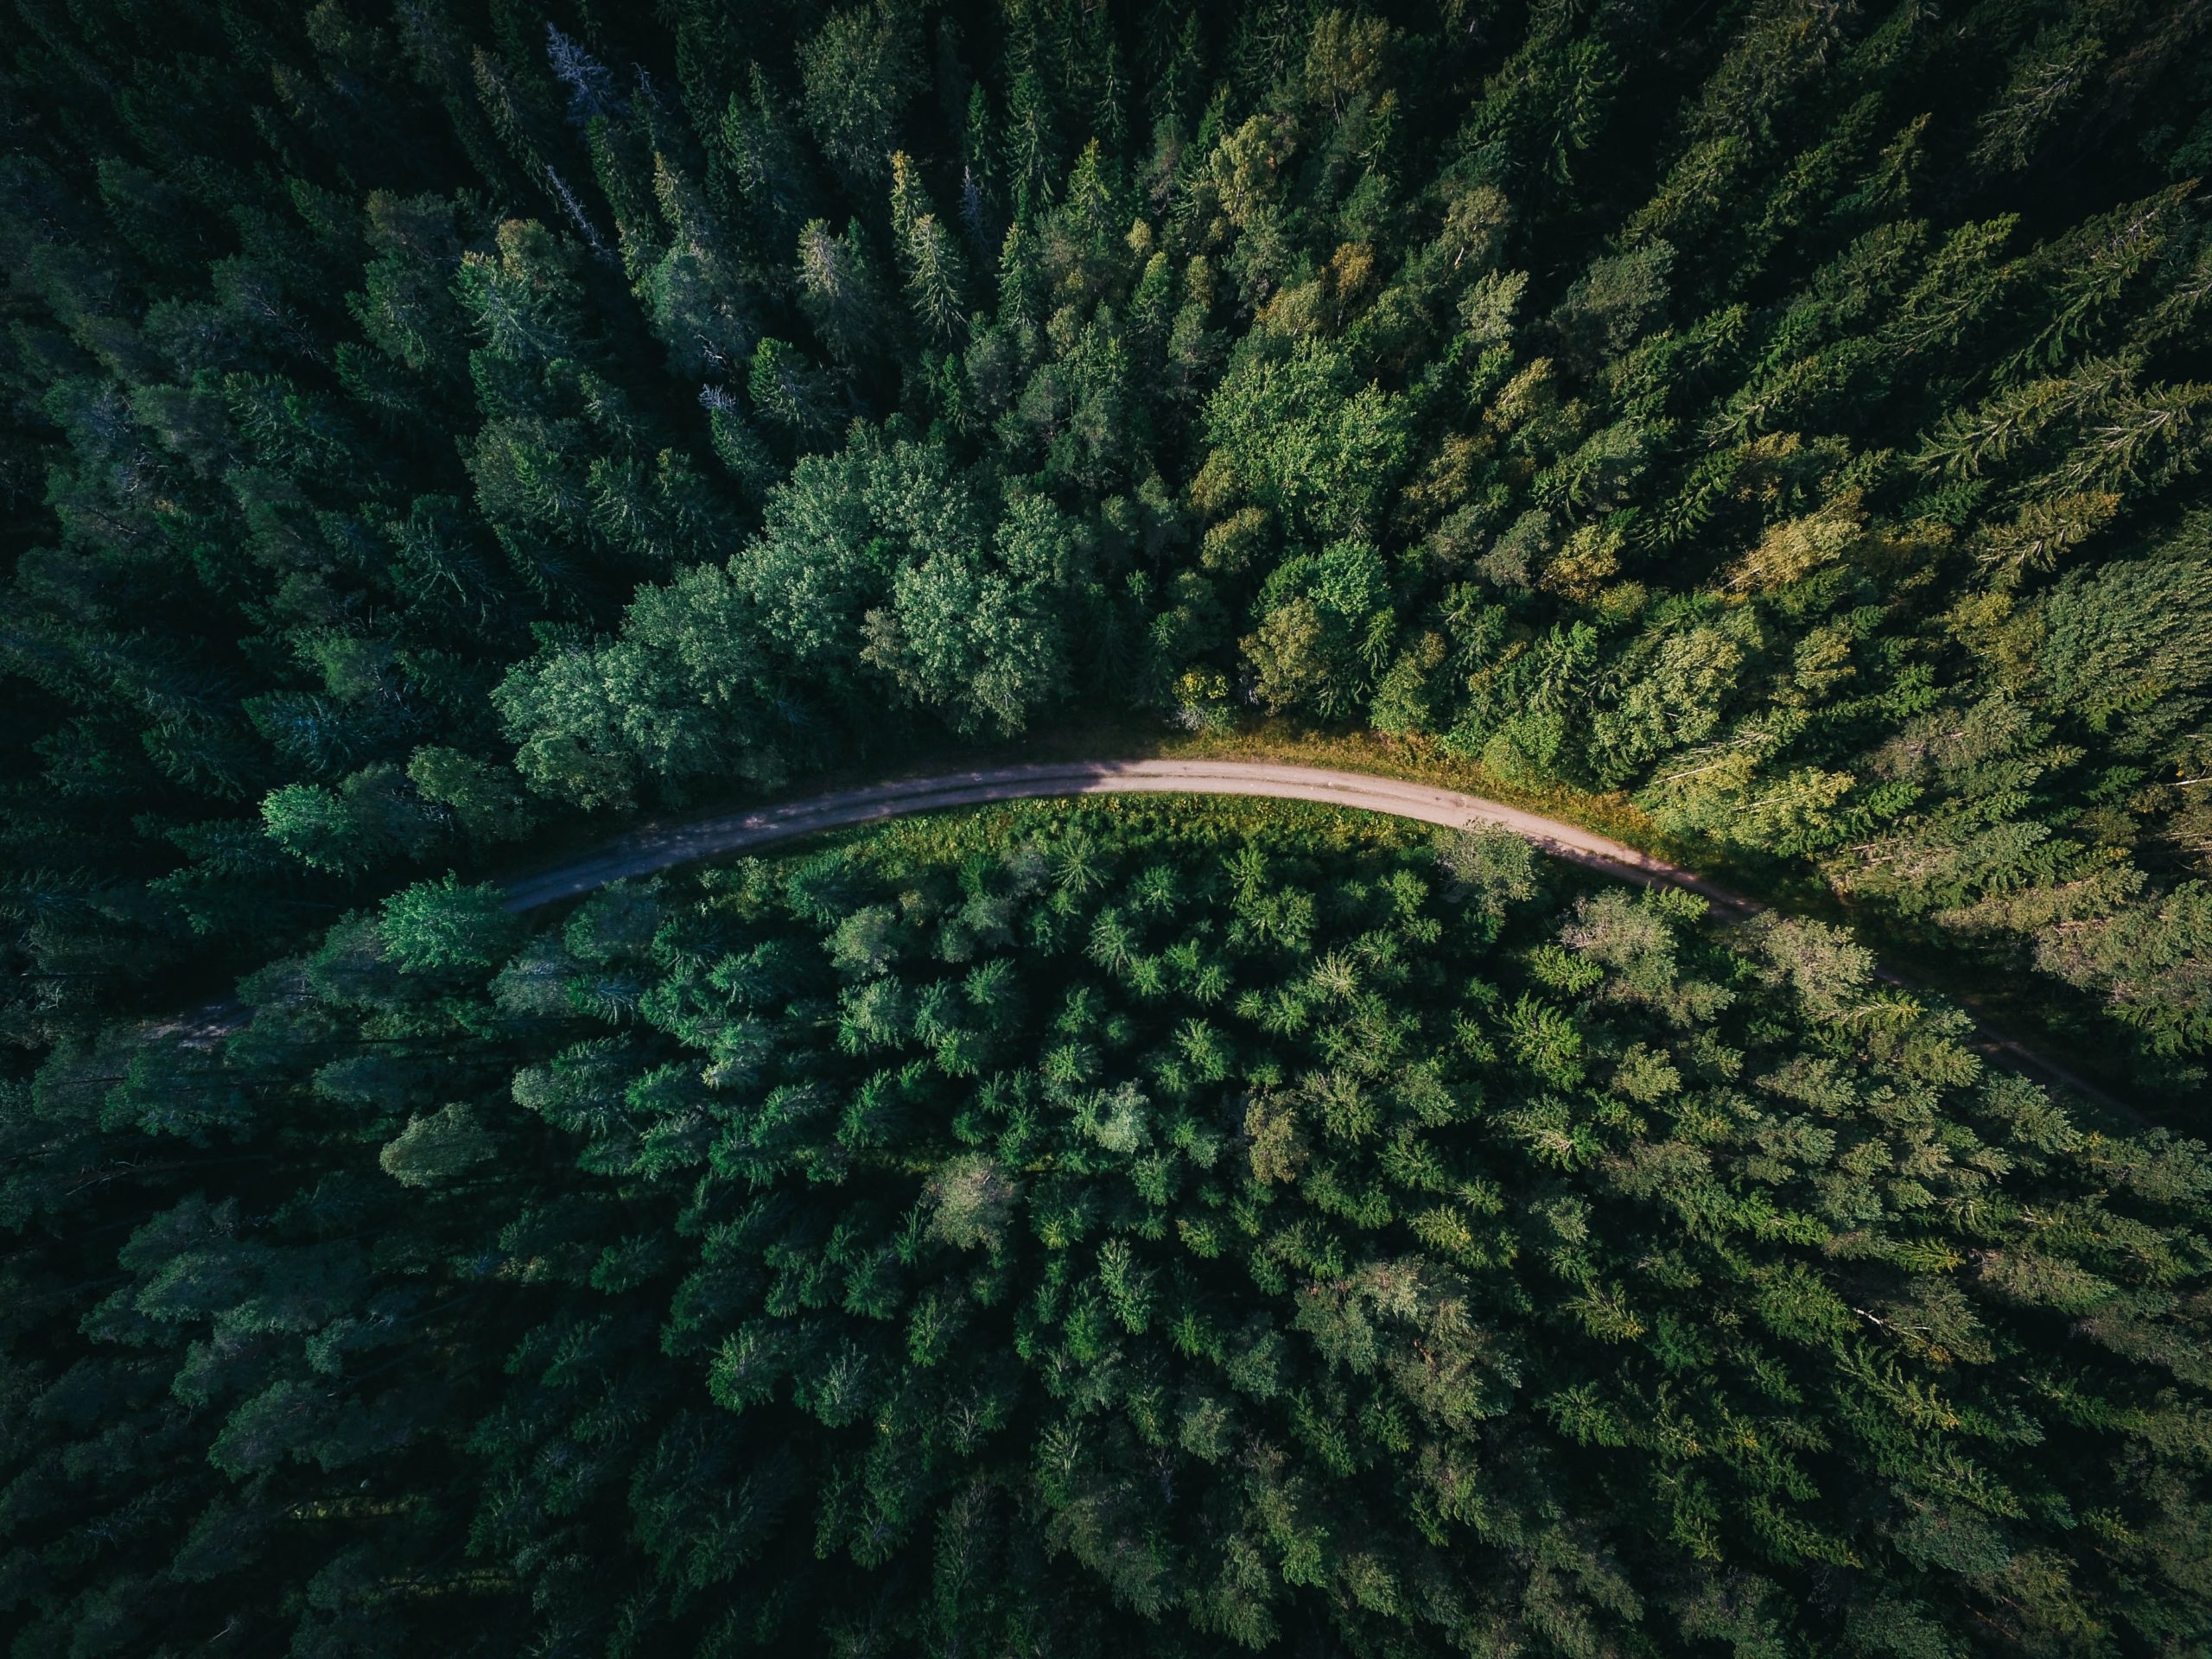 A road through a forest as seen from above.